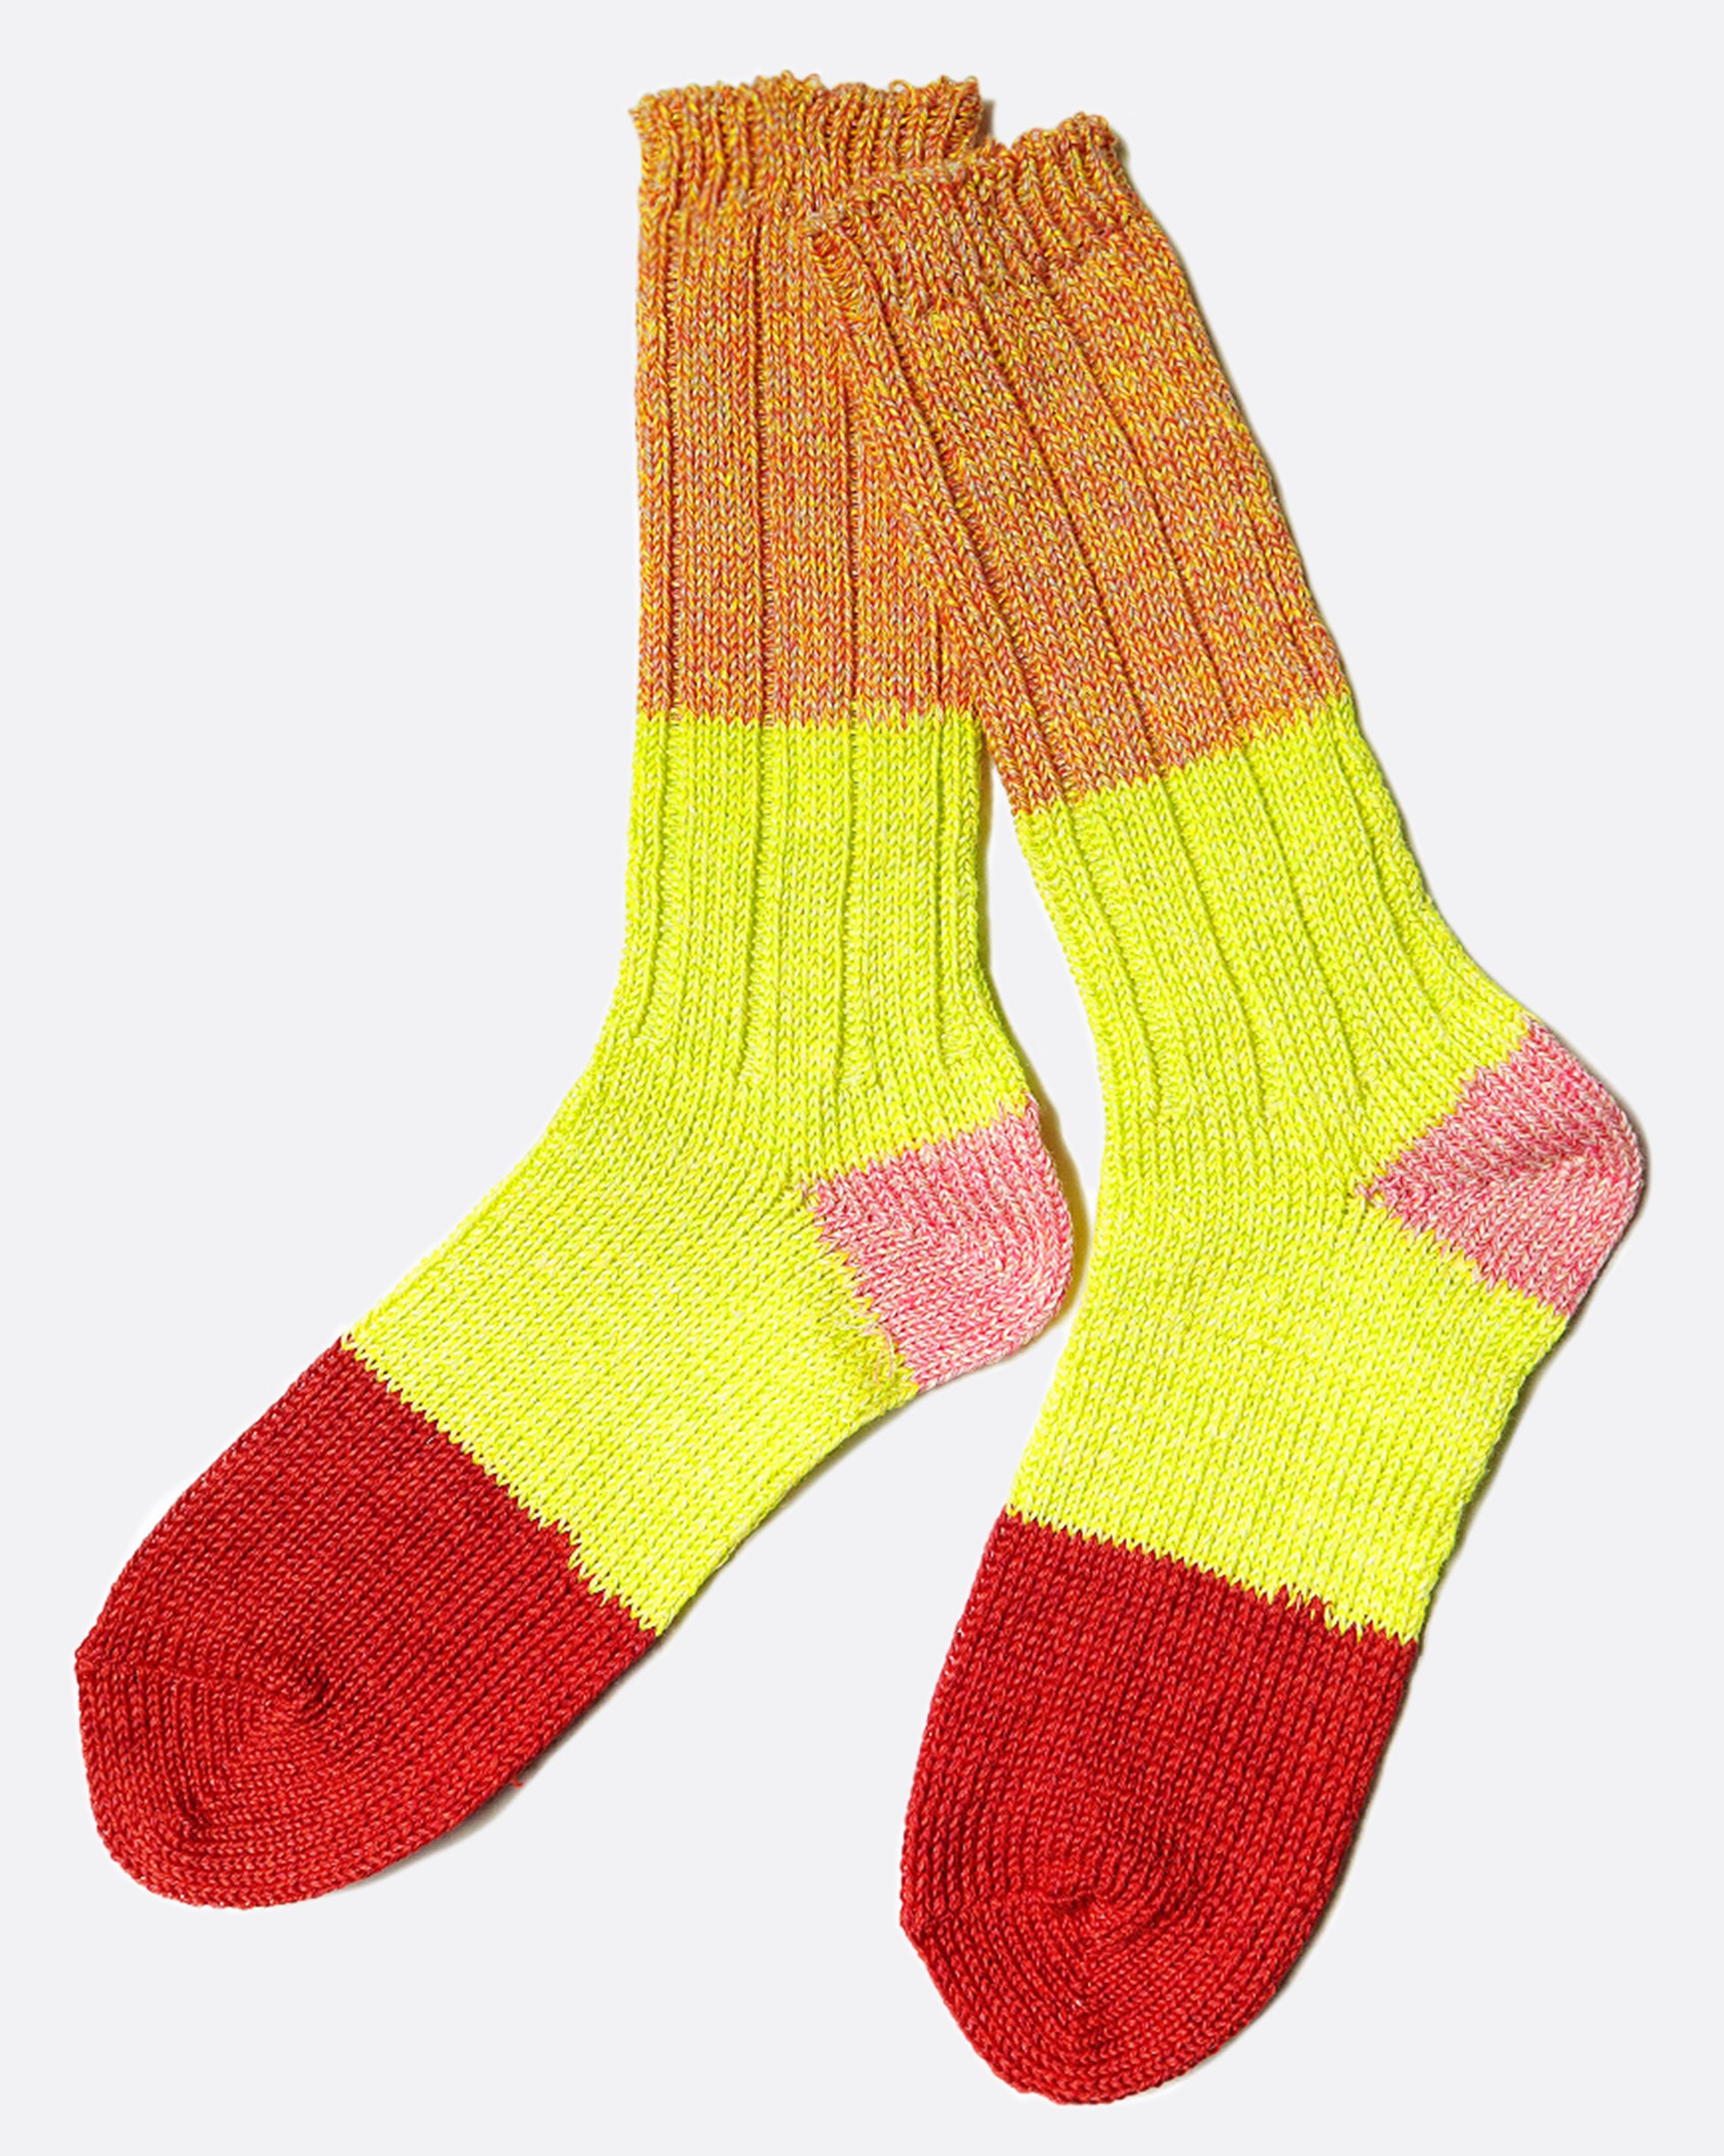 Color blocked linen tube socks in a mix of red, yellow, pink and orange.